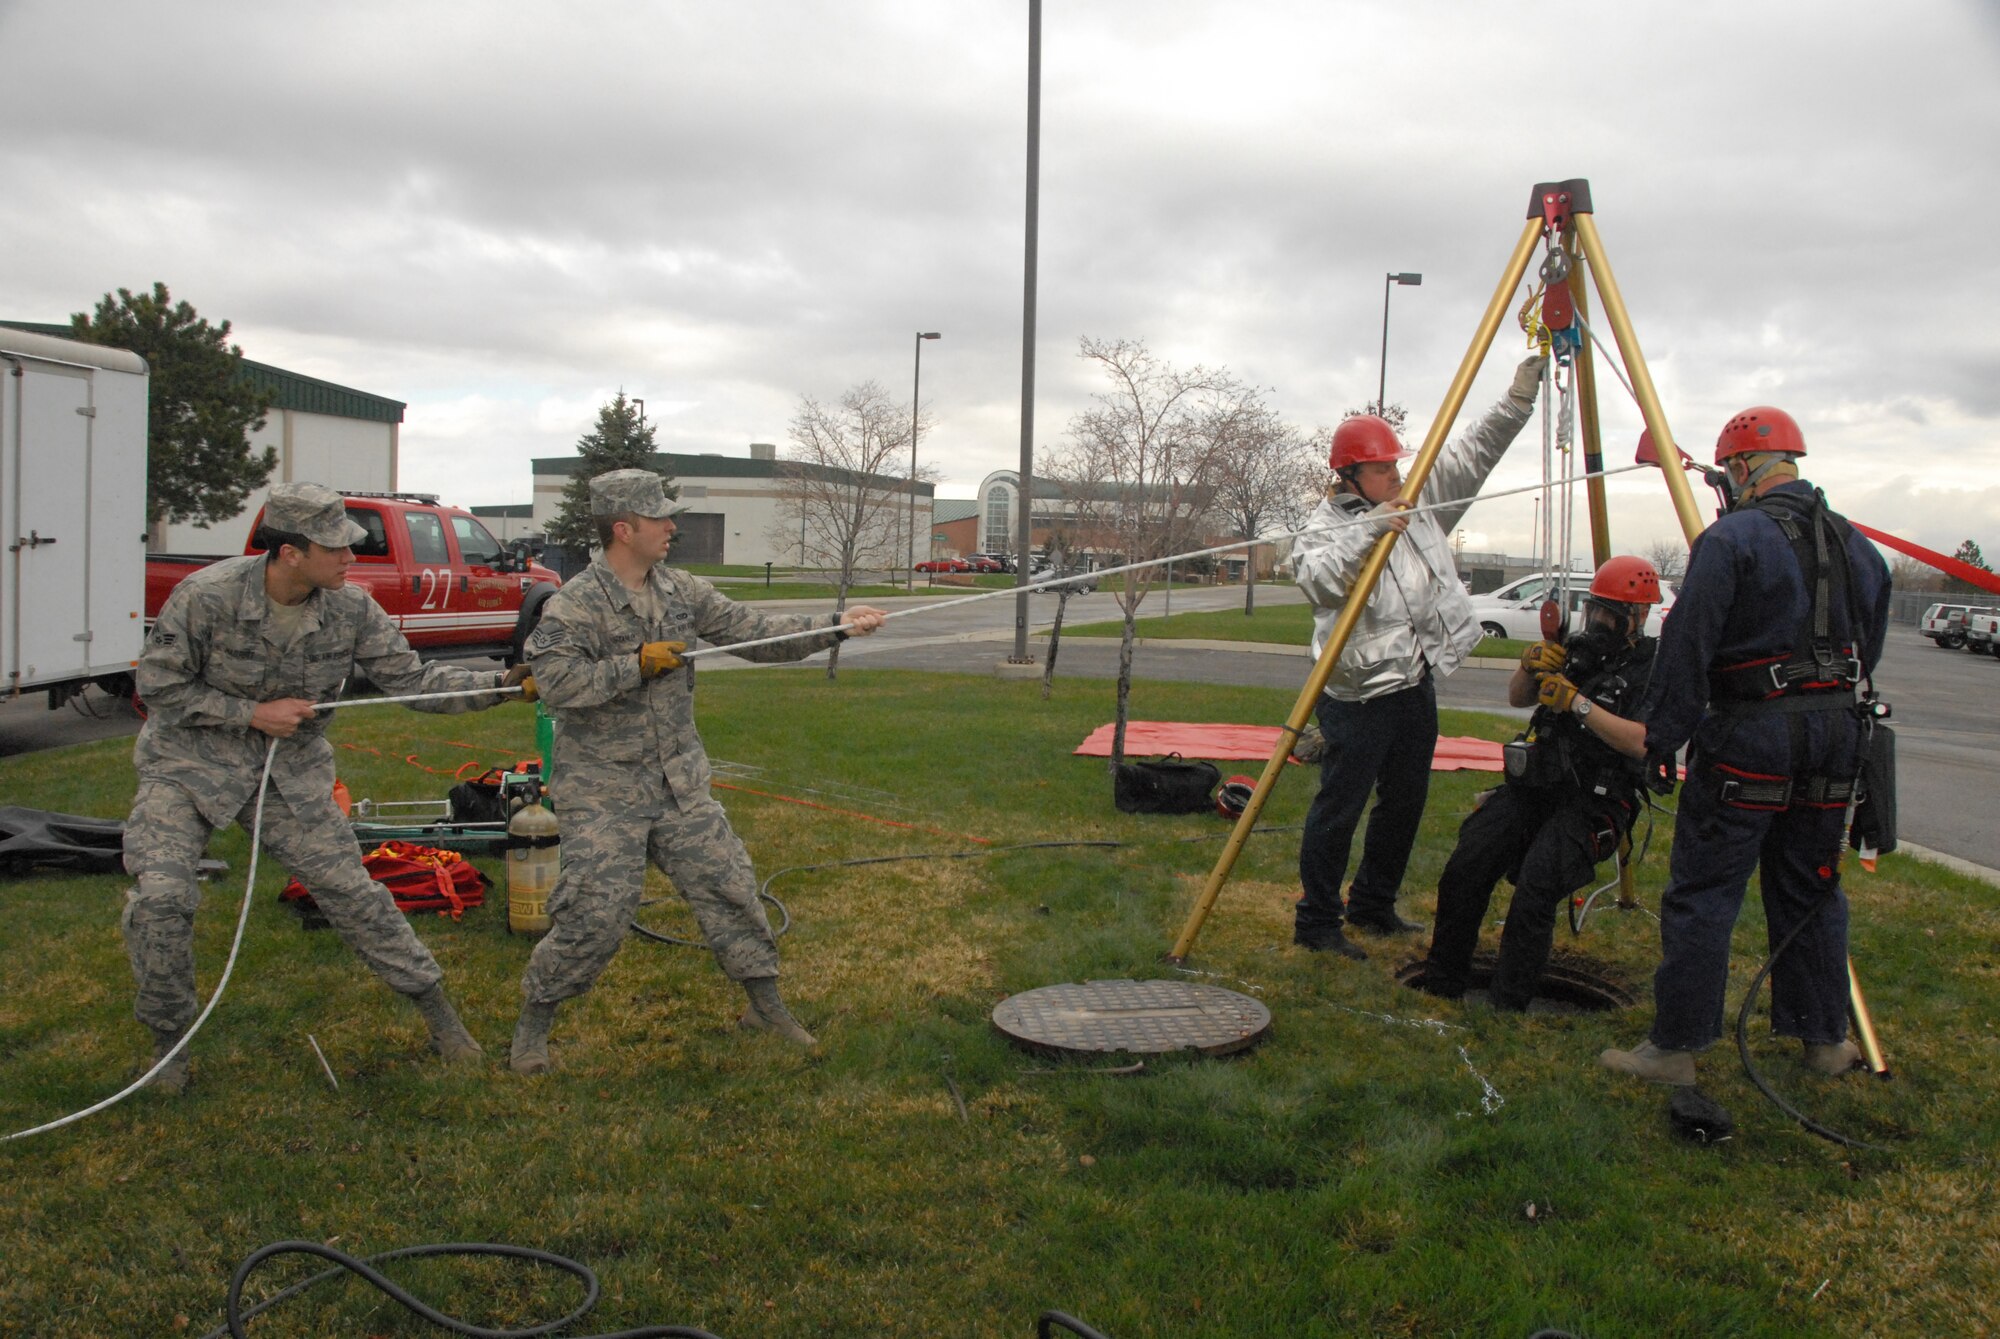 Firefighters with the 151st Air Refueling Wing participate in a confined space emergency rescue exercise April 11, 2013.  A mannequin lowered into a manhole served as a victim that Staff Sgt. Leo Jensen and Staff Sgt. Thomas Beck rescued.  Training exercises like this occur annually, allowing Guardsmen the chance to keep their abilities up to date, and to be prepared for any emergency.  (U.S. Air Force Photo by A1C Emily Hulse/Released)